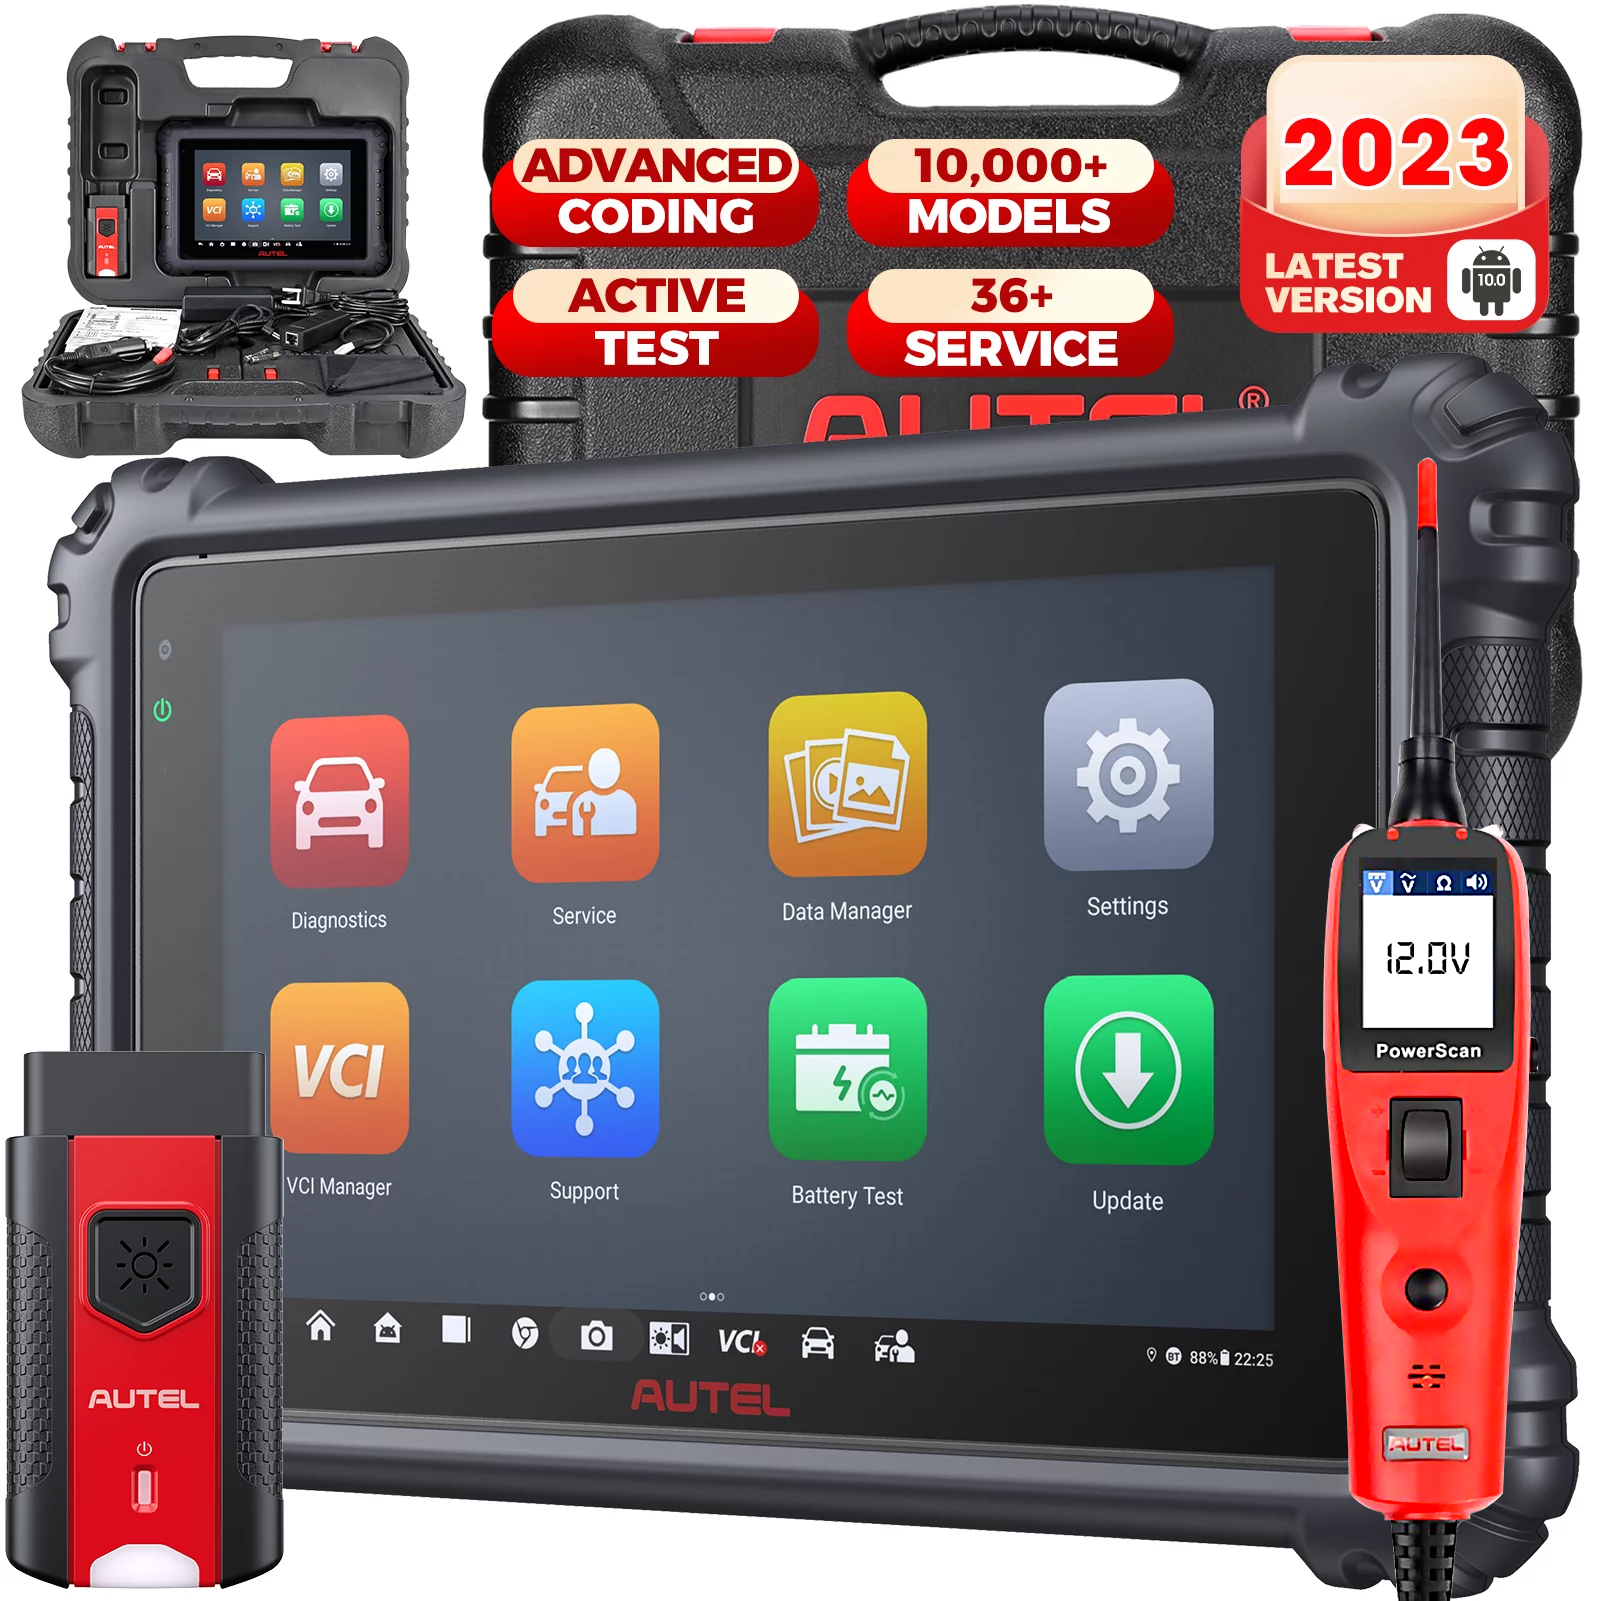 Autel MaxiSys MS906 Pro Car Diagnostic Tool, ECU Coding & Bidirectional, code reader, obd2 scanner, diagnostic scan tool, 2022 Upgraded of MS908 MK908 MS906BT MK906BT, CAN FD/ DoIP, 36+ Resets & OE All Systems Scan, FCA Autoauth, with $60 MV108